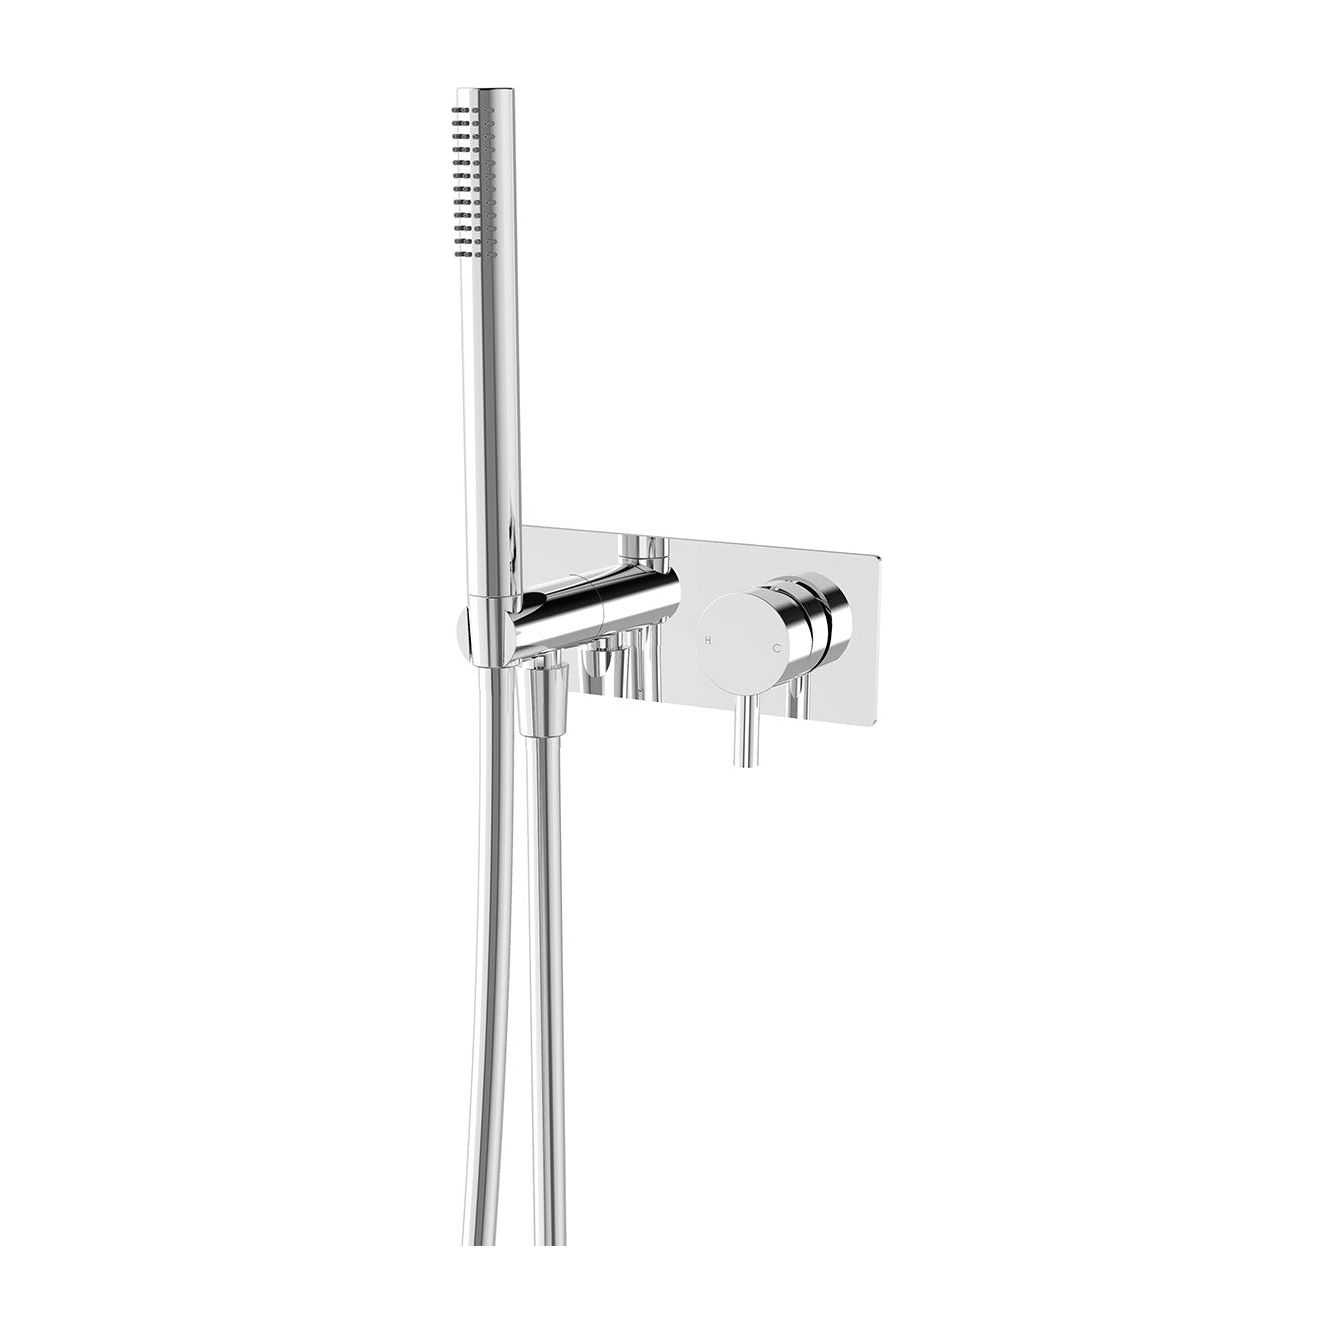 Axus Pin Shower Mixer and Handshower with Plate